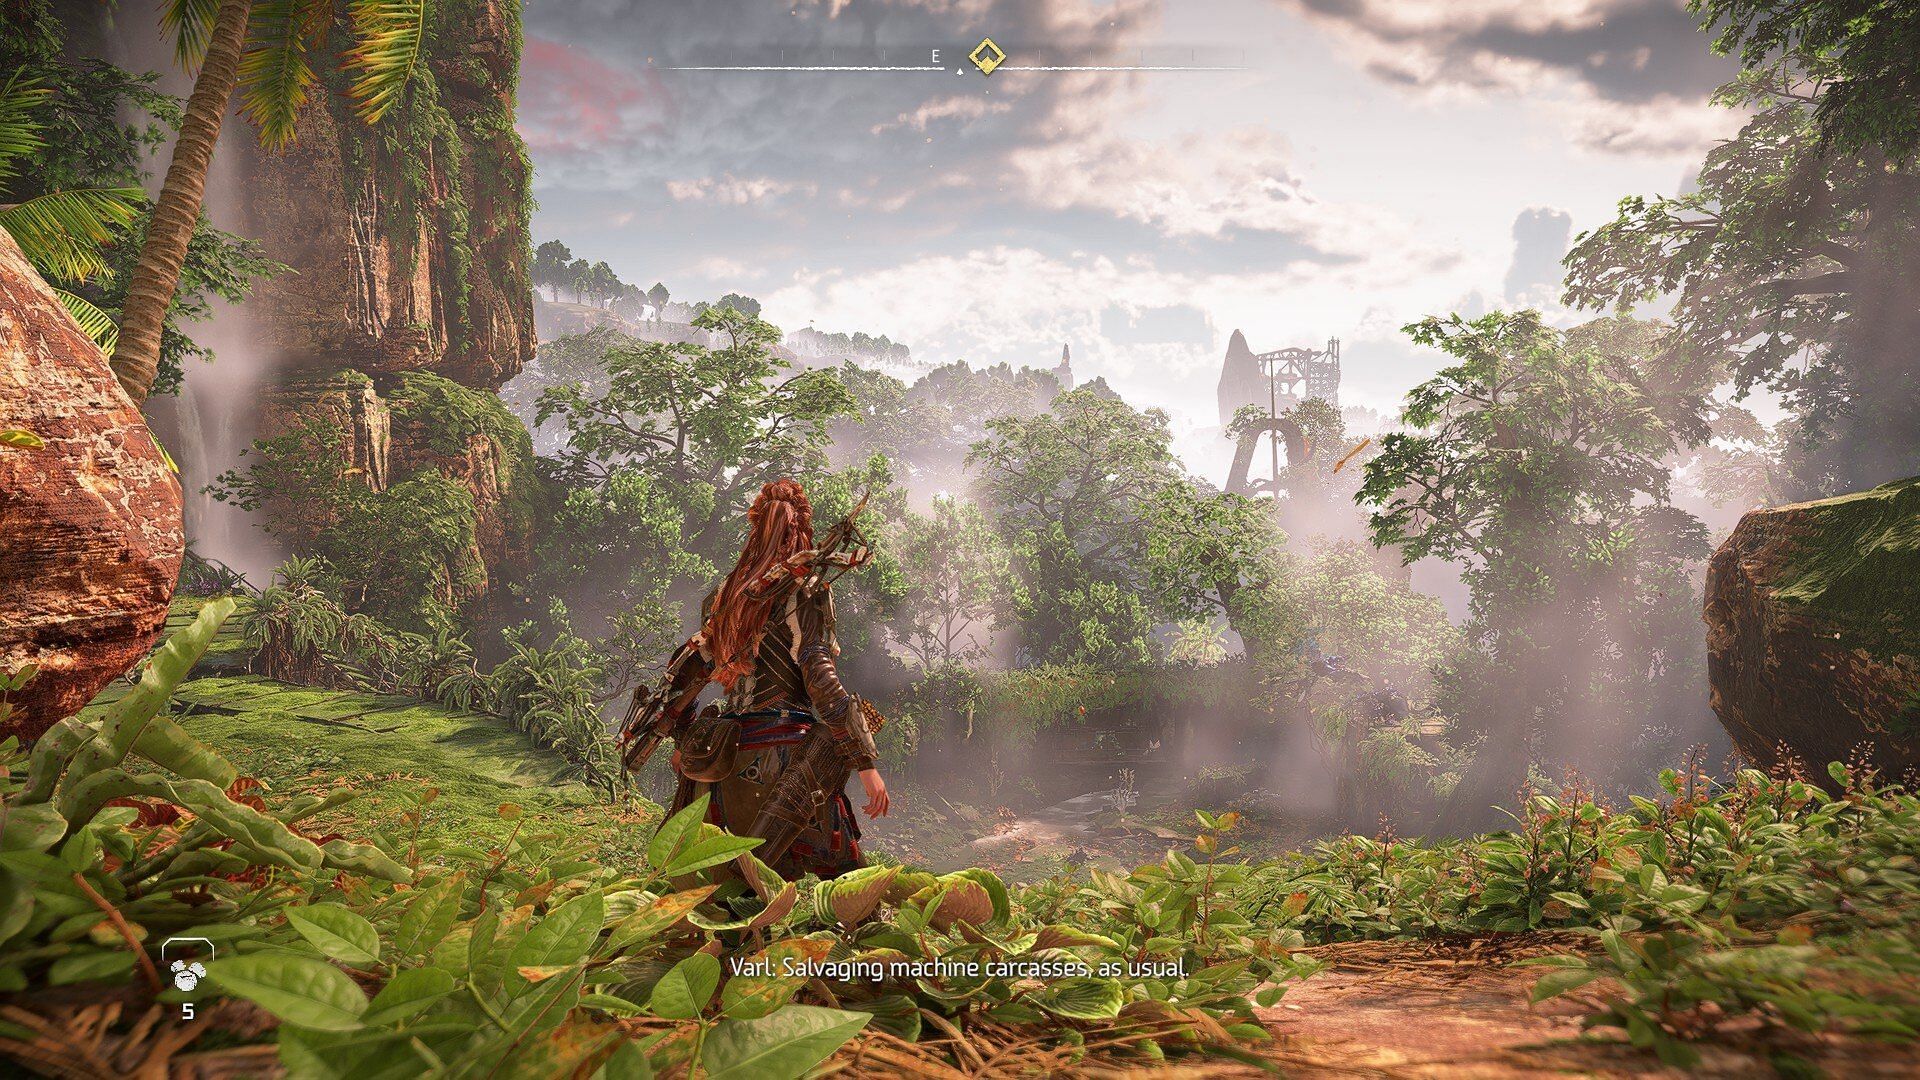 Regardless of the minor performance issues, Horizon Forbidden West still looks incredible on PC. (Image via Guerrilla Games)